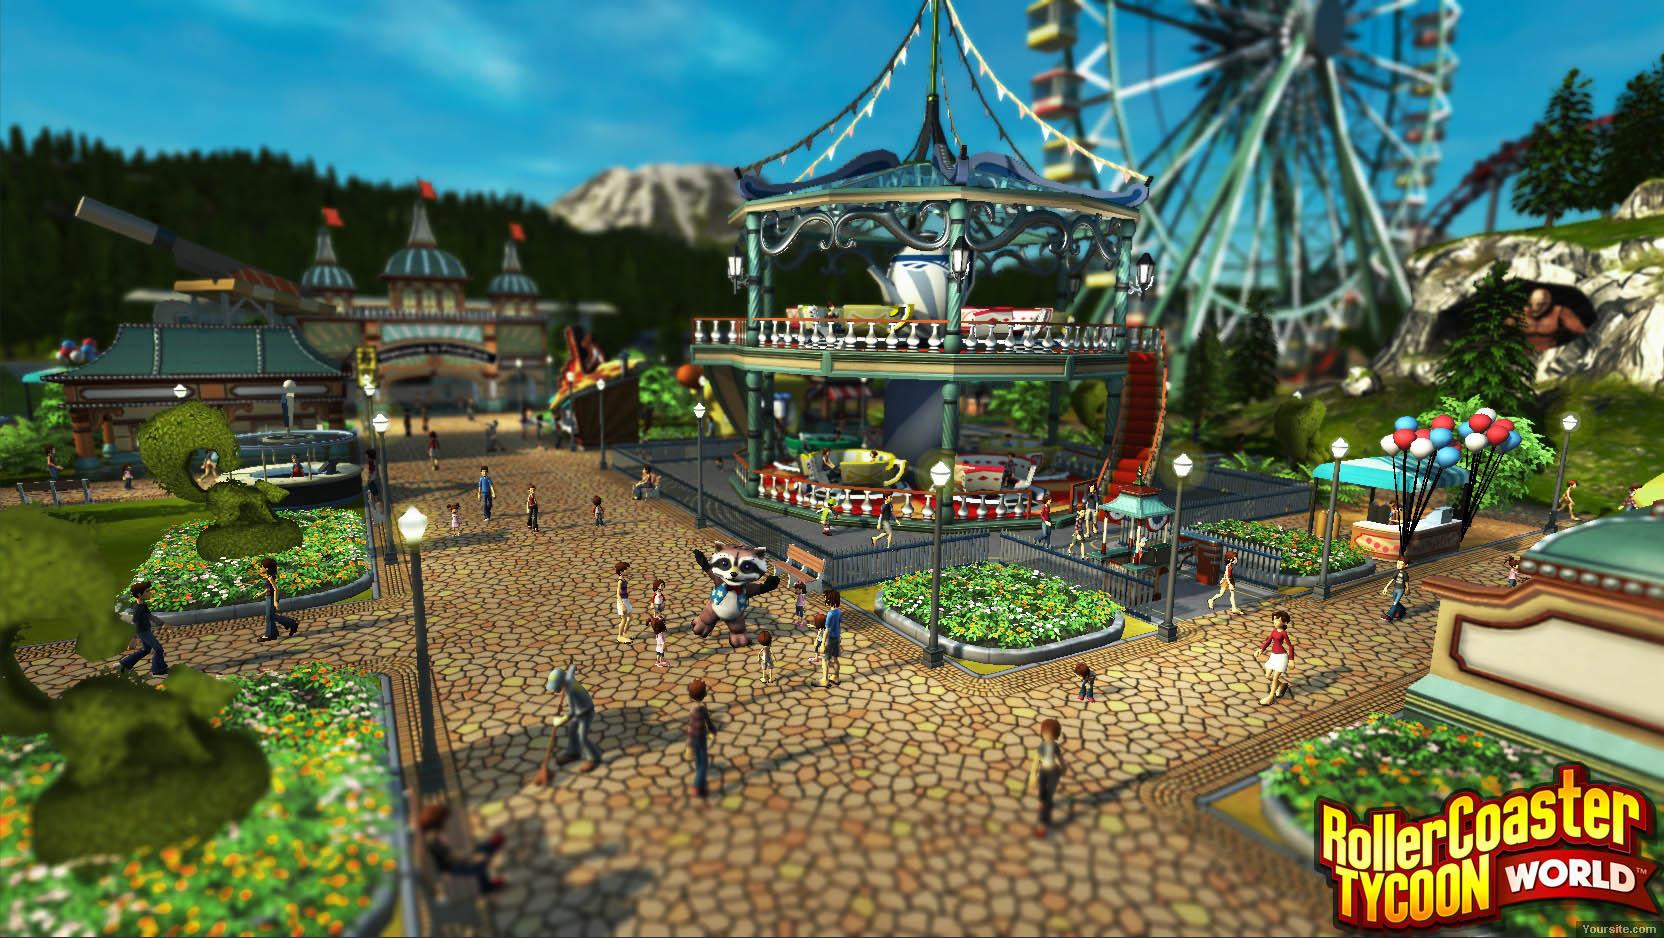 Game park is. Игра Rollercoaster Tycoon. Rollercoaster Tycoon 3. Tycoon парк аттракционов. Rollercoaster Tycoon 1.